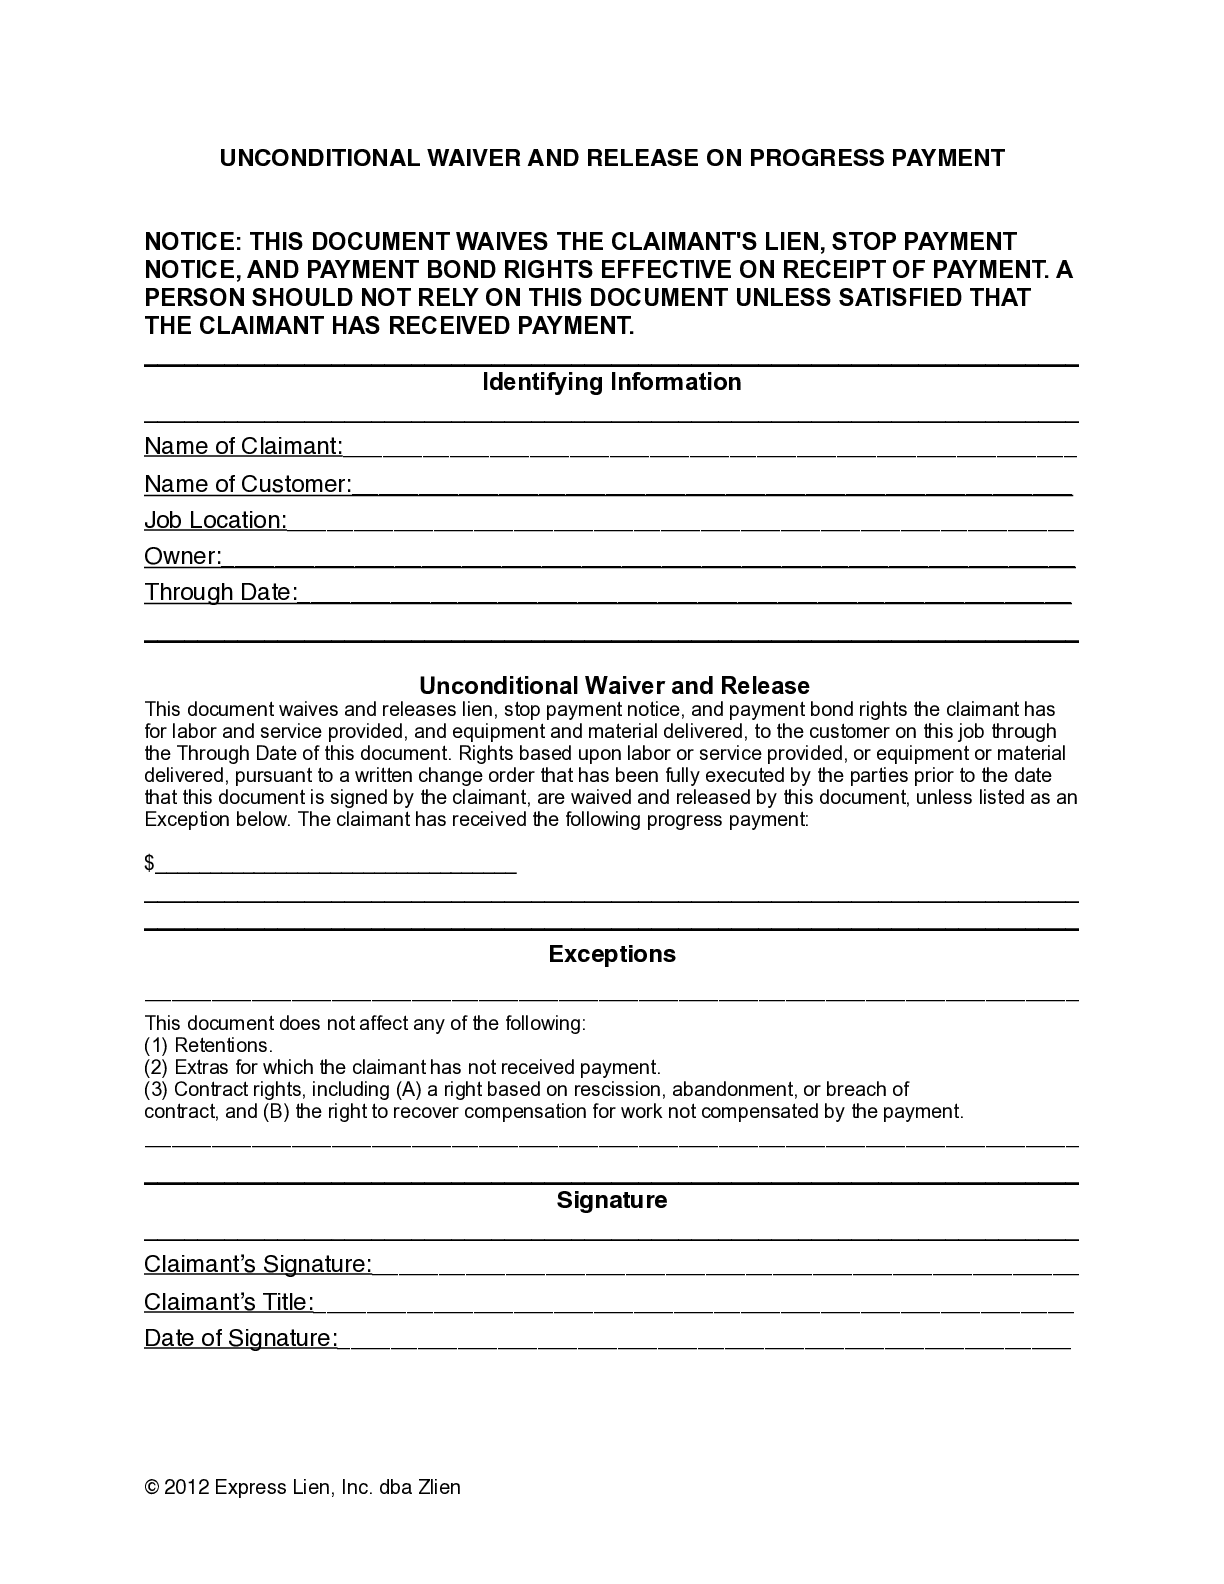 Washington DC Partial Unconditional Lien Waiver Form - free from